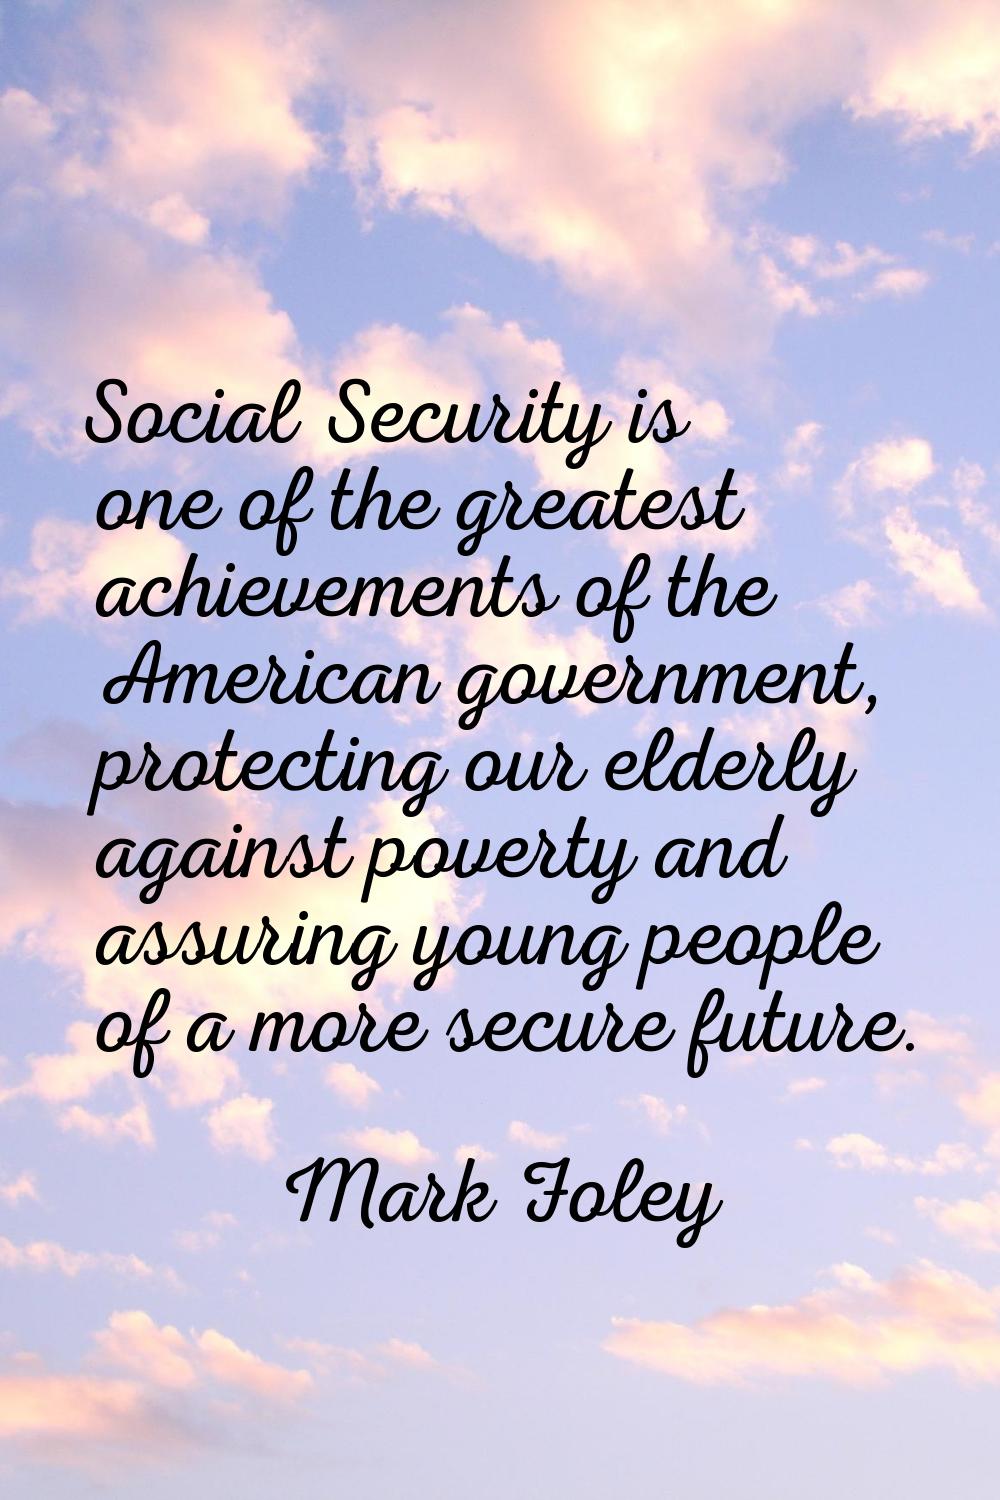 Social Security is one of the greatest achievements of the American government, protecting our elde